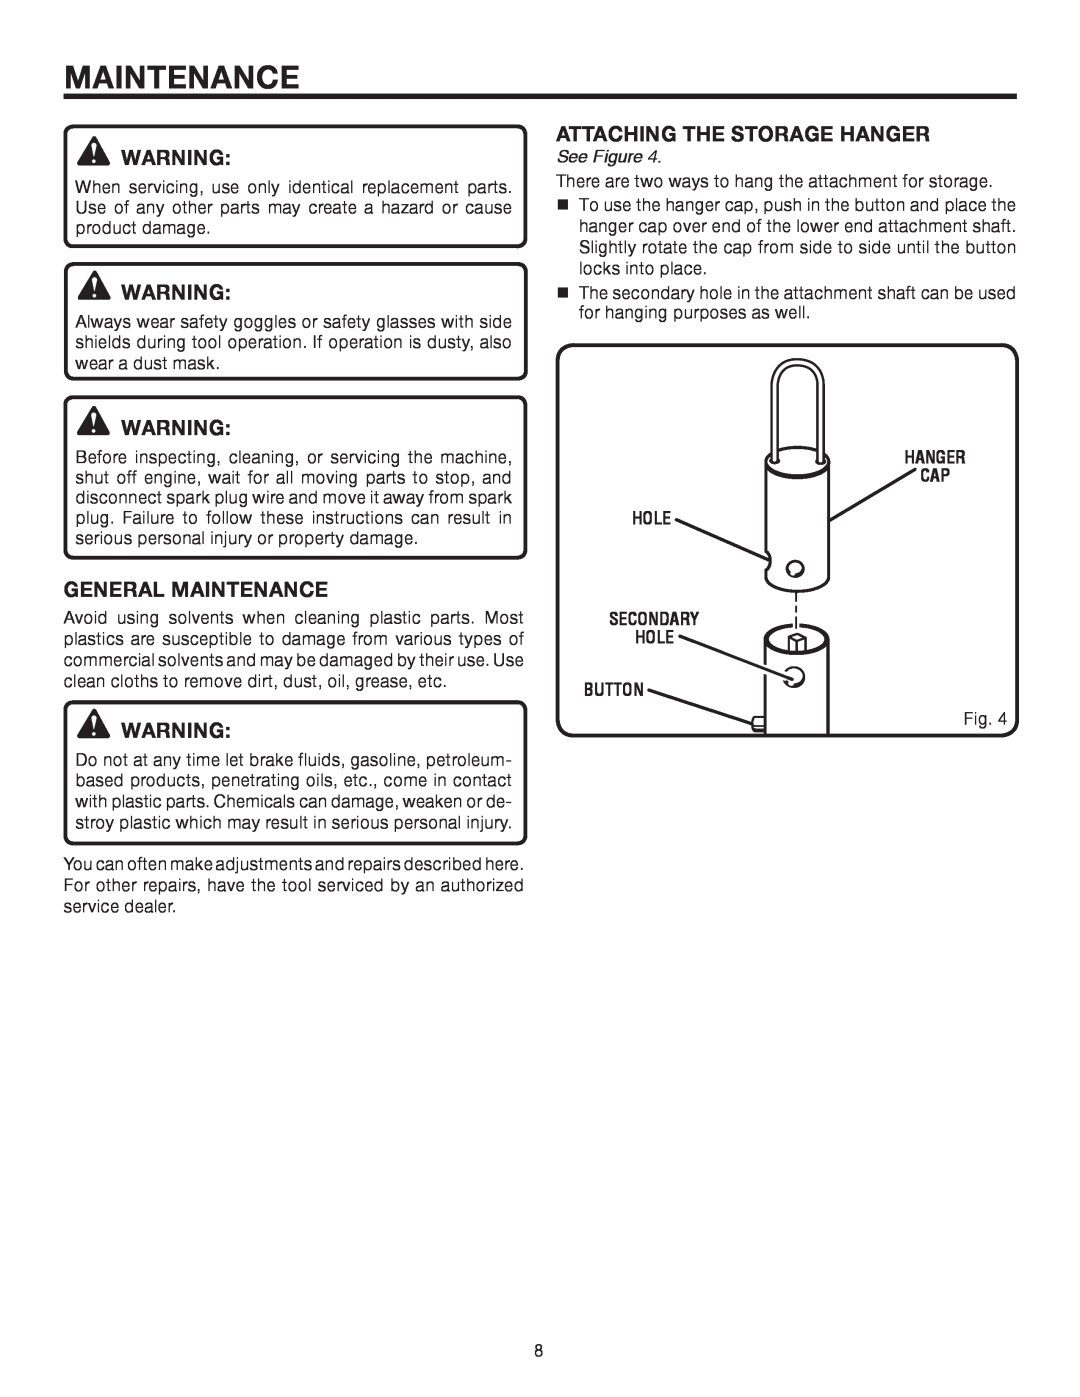 Ryobi UT15519E manual Attaching The Storage Hanger, General Maintenance, See Figure, Hole Secondary Hole Button 